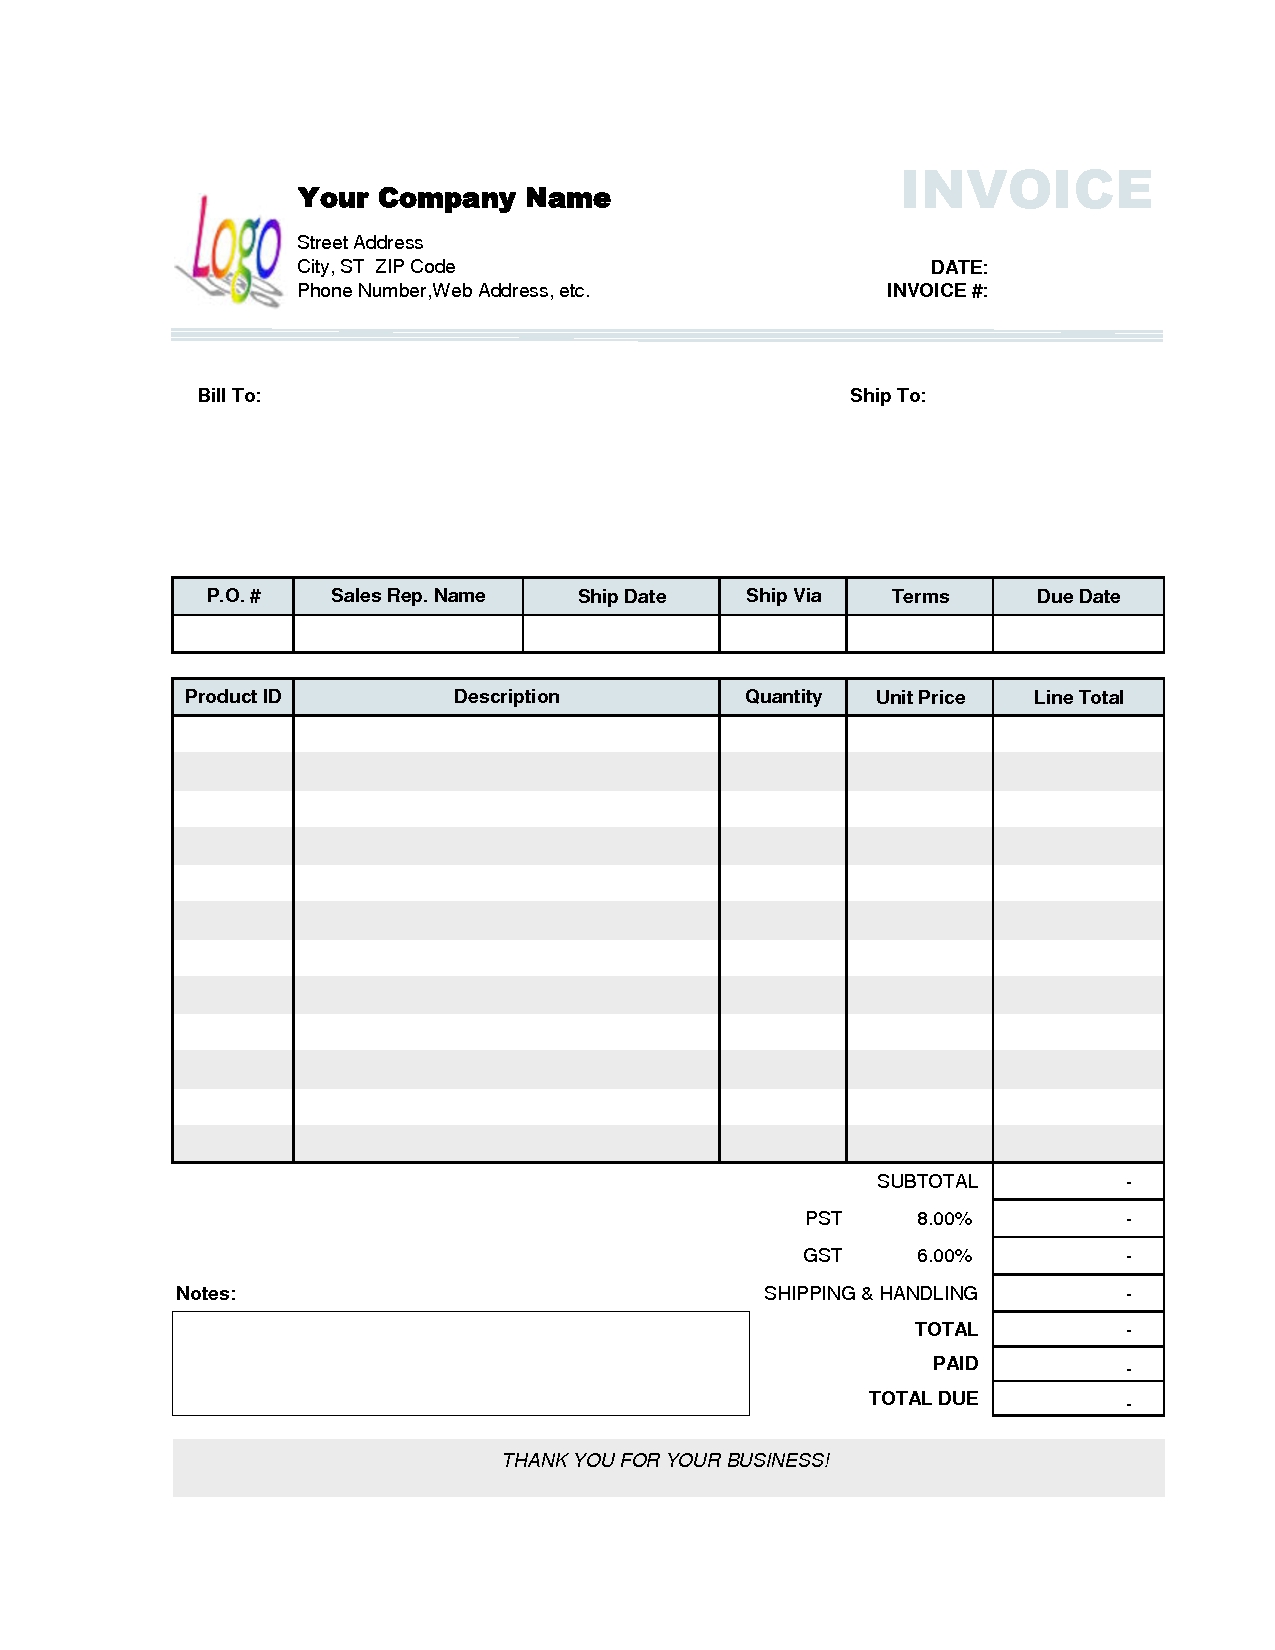 business invoice template invoice example free business invoice forms